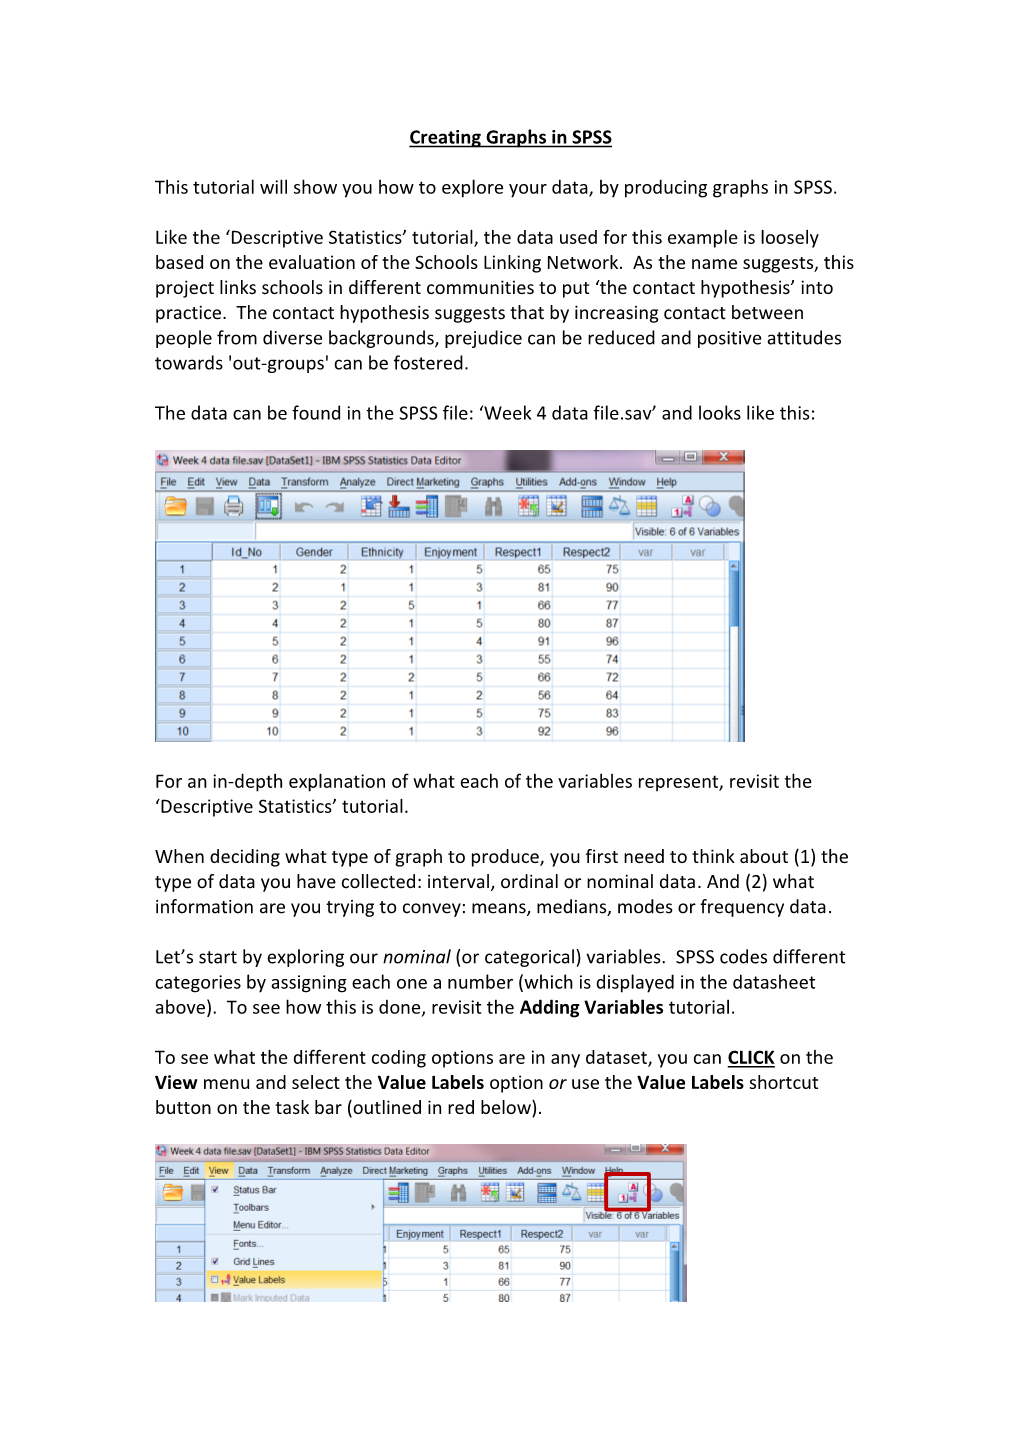 Creating Graphs in SPSS This Tutorial Will Show You How to Explore Your